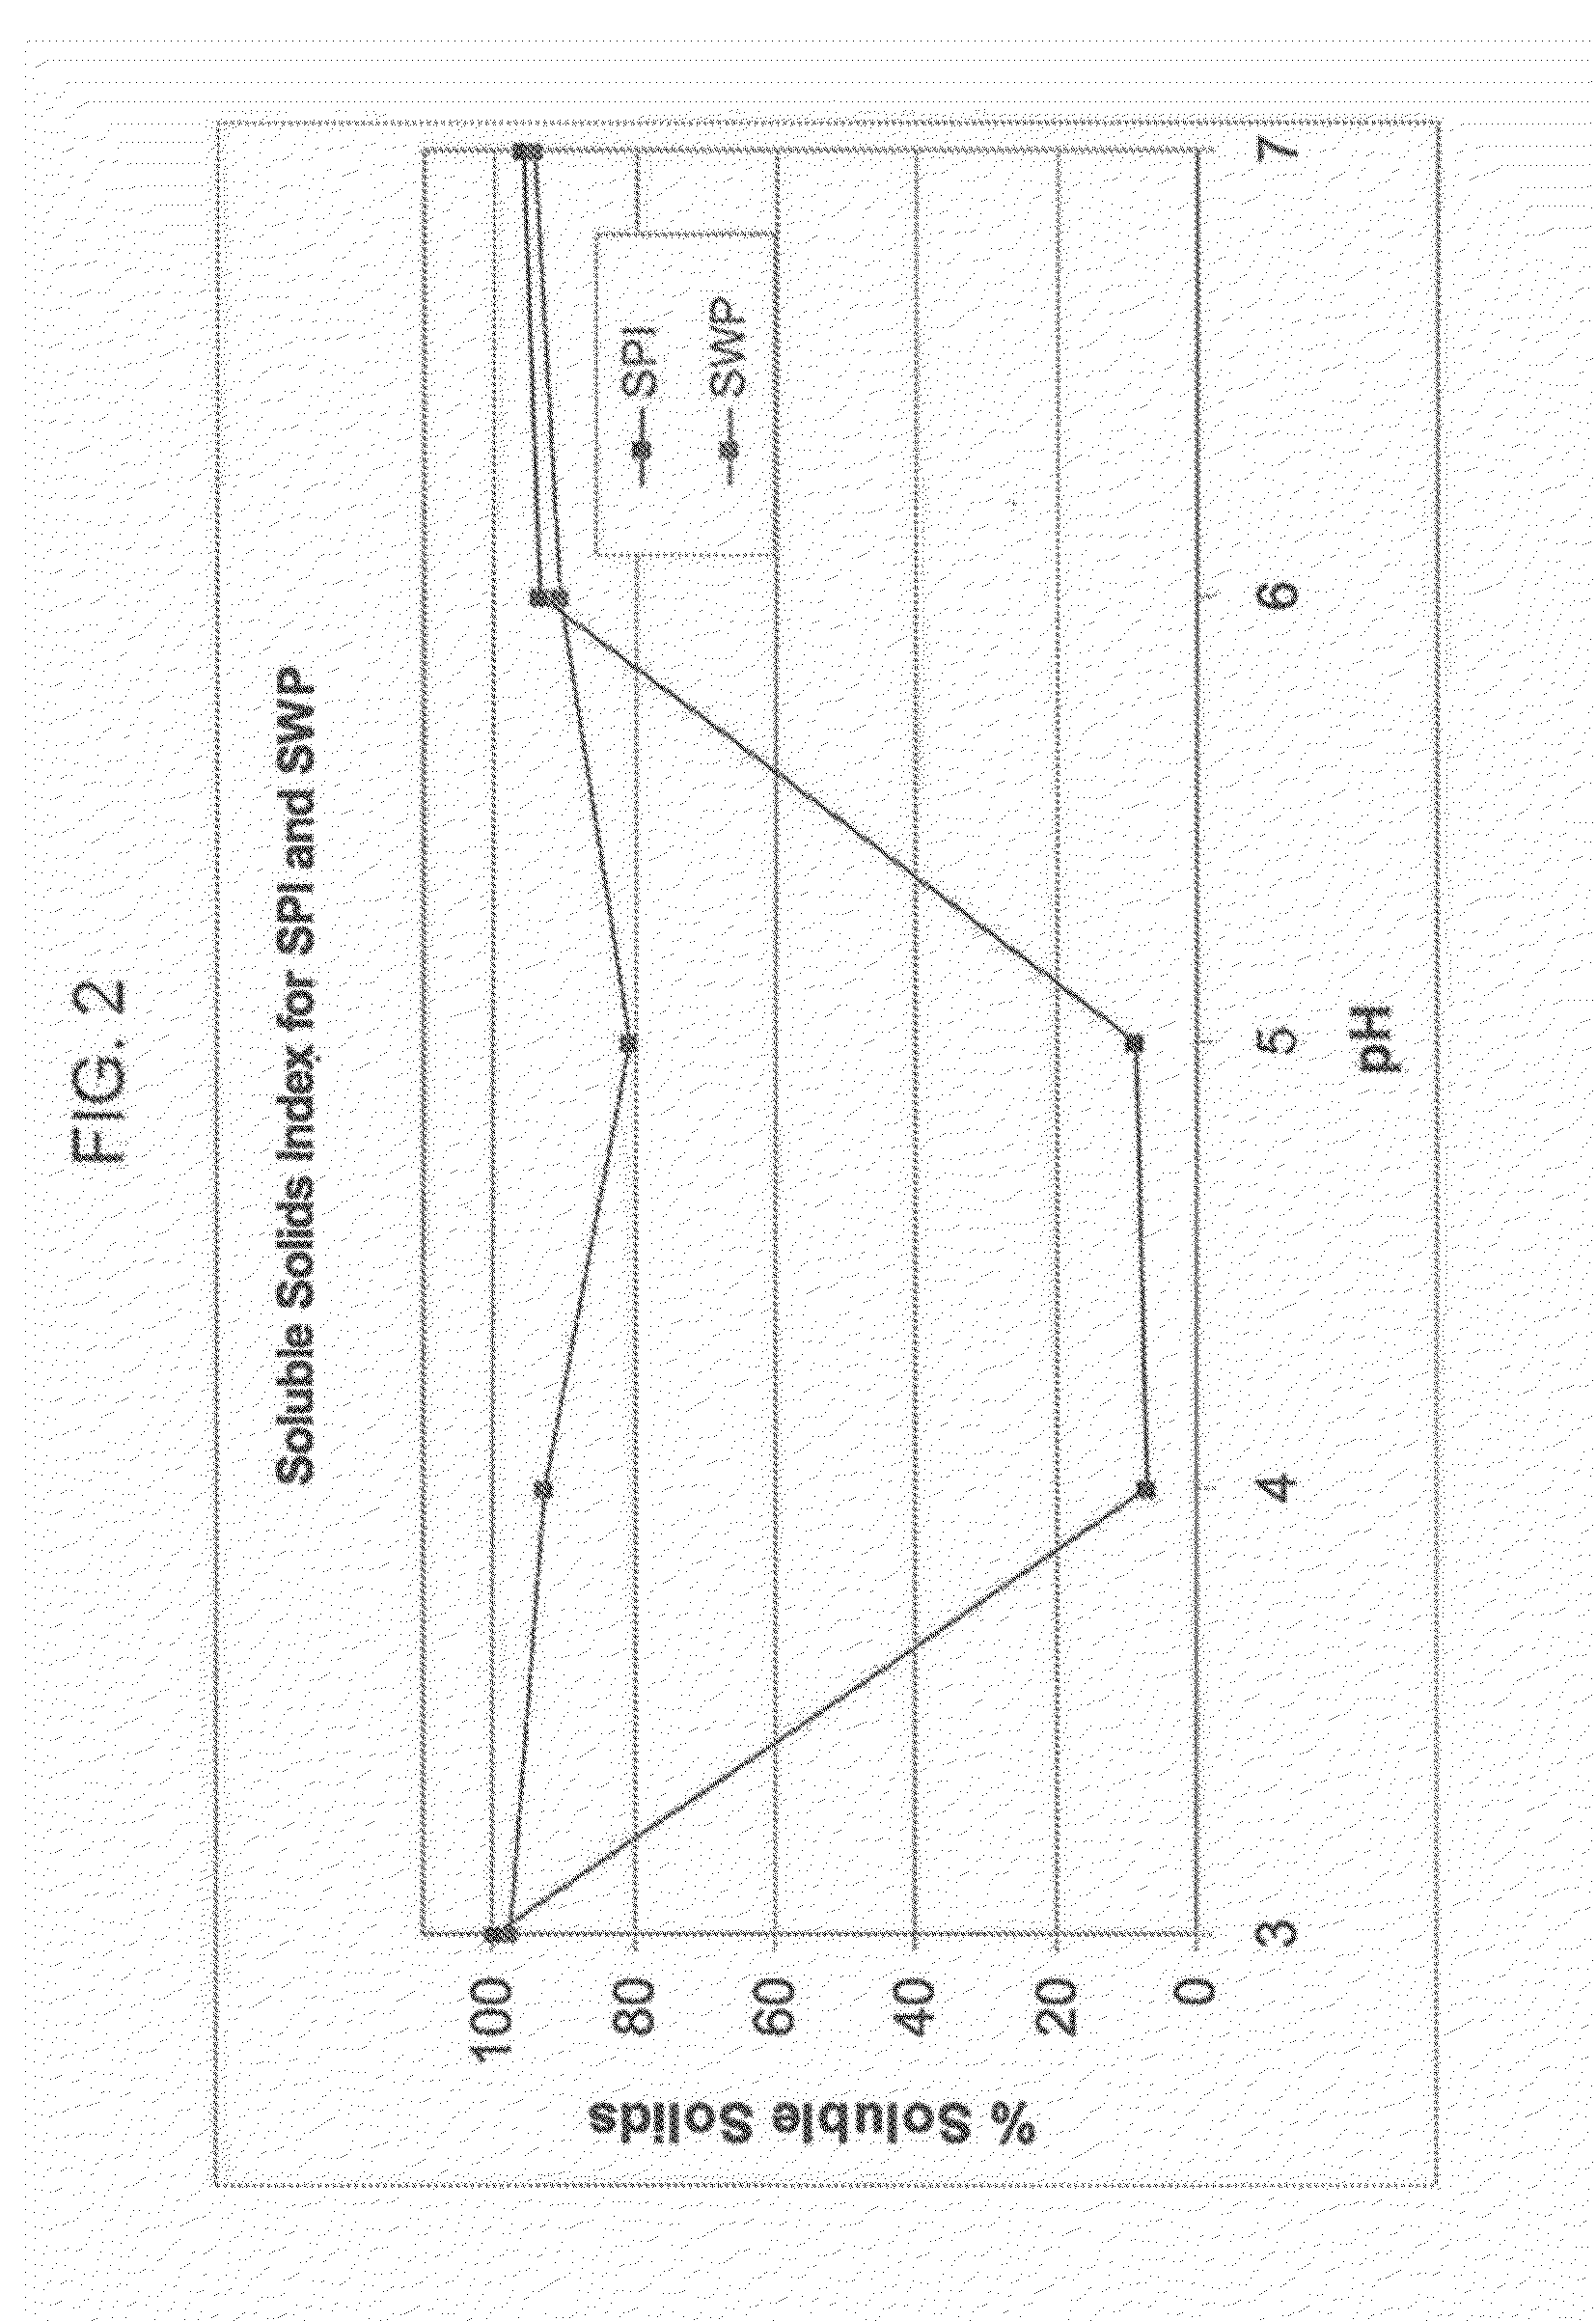 Dessert compositions comprising soy whey proteins that have been isolated from processing streams